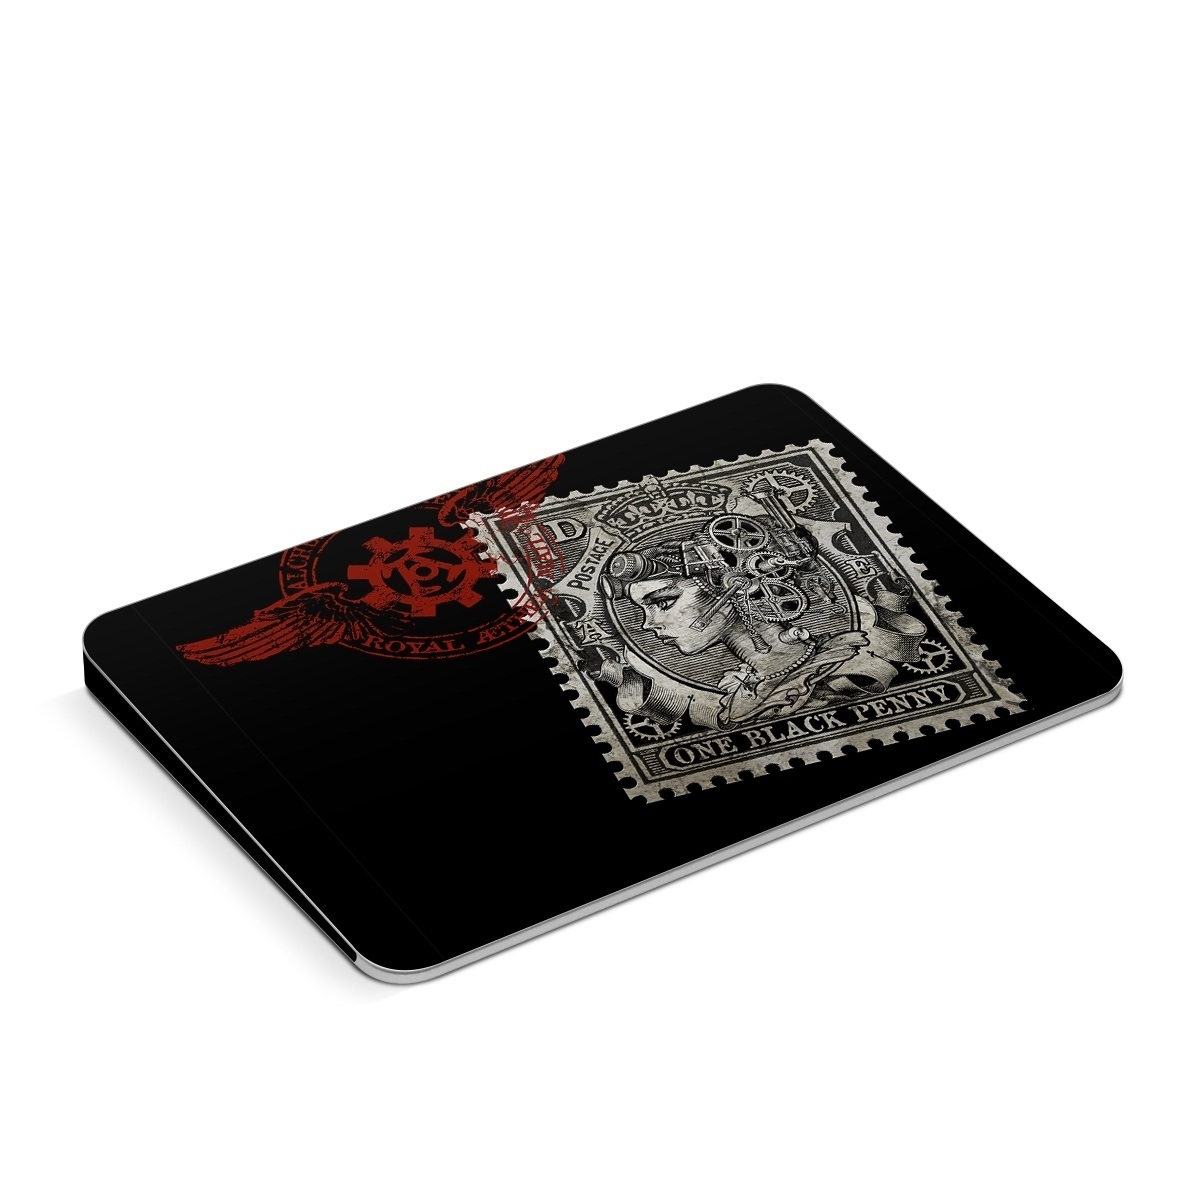 Apple Magic Trackpad Skin design of Font, Postage stamp, Illustration, Drawing, Art, with black, gray, red colors